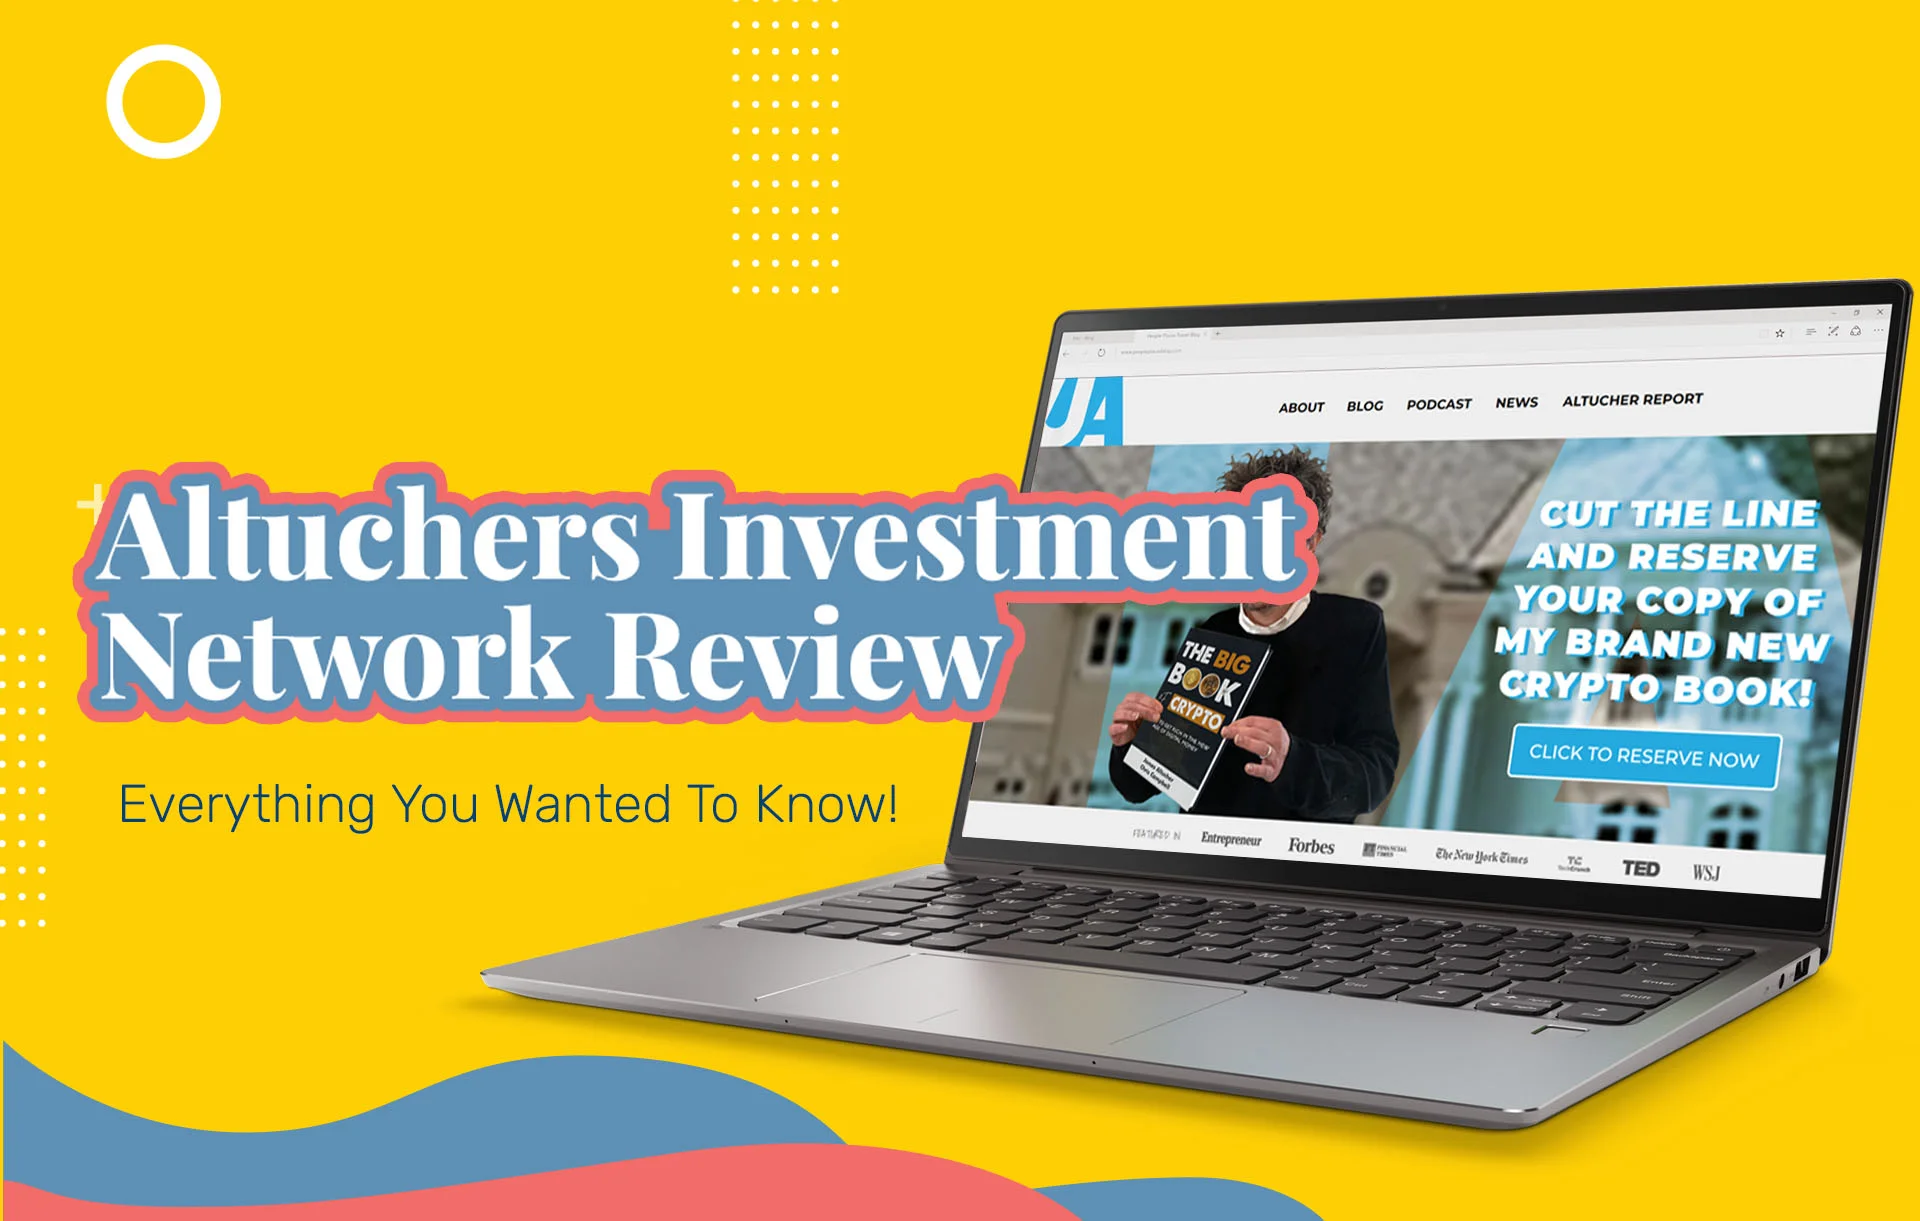 Altuchers Investment Network Reviews: Everything You Wanted To Know!